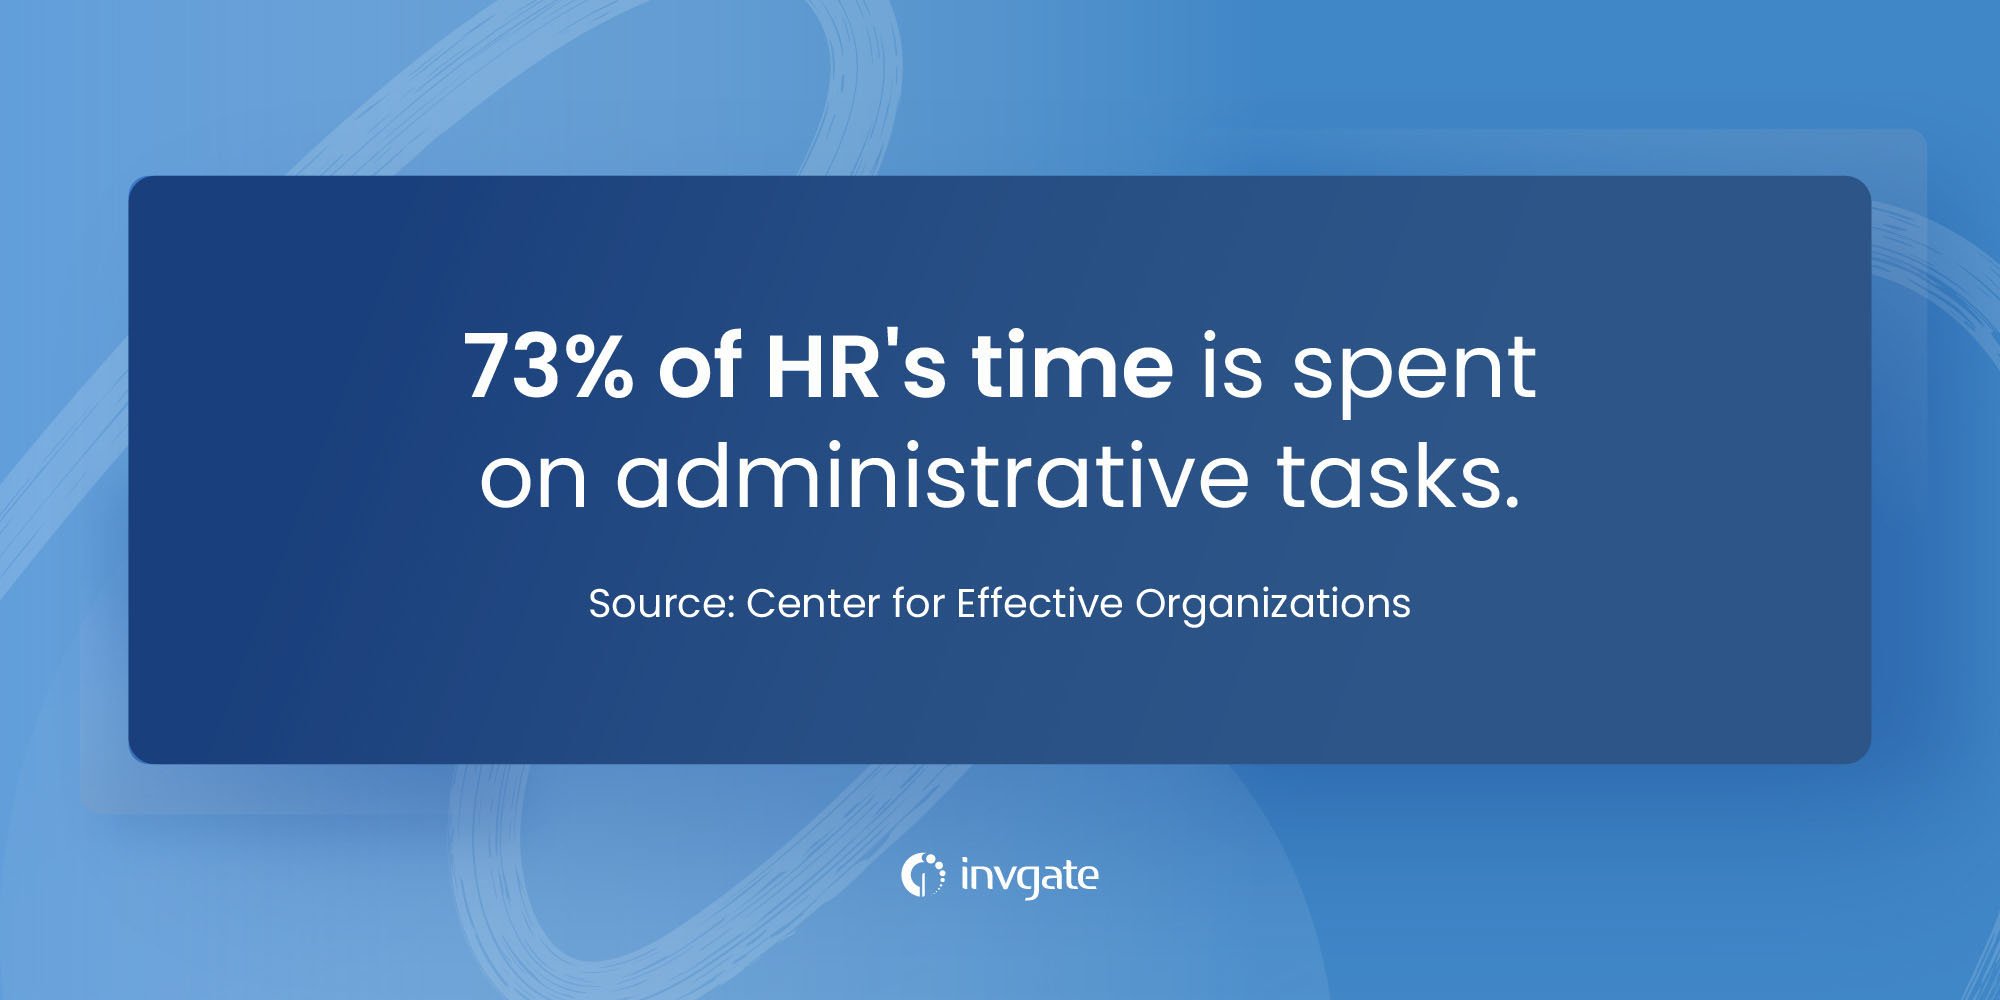 By automating employee offboarding, you'll be allowing your HR department to put their time to better use, especially since 73% of their time is spent on administrative tasks. 